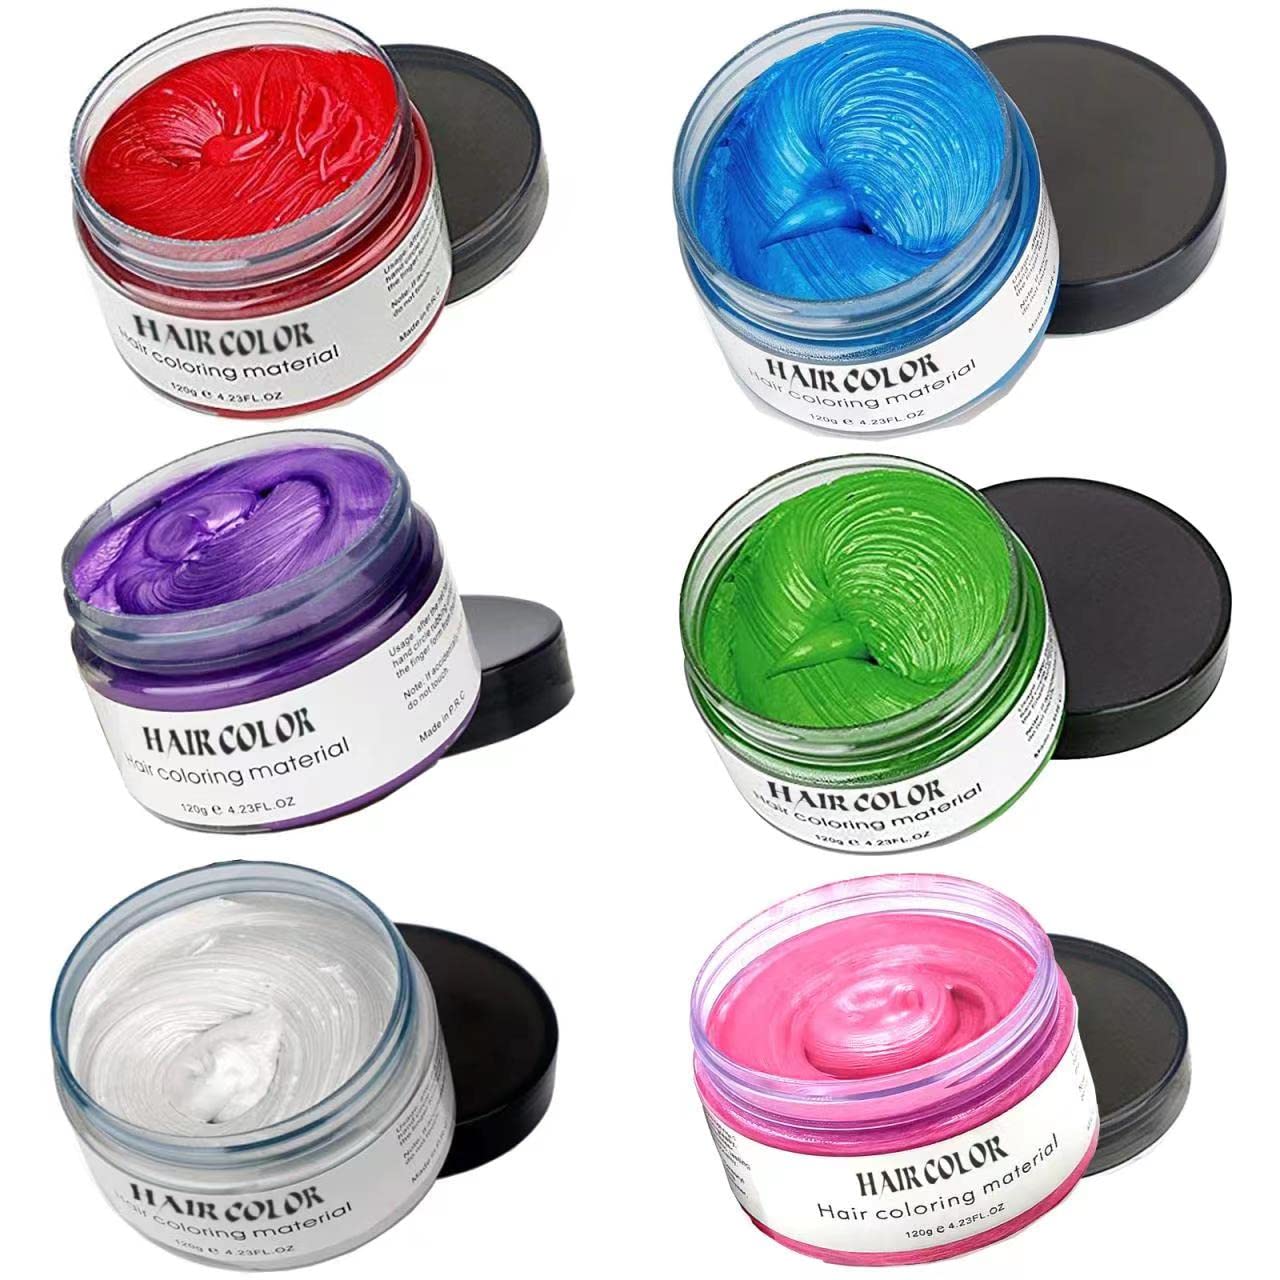 Blue Green Purple Red White Pink Hair Dye Temporary Hair Color Wax,Acosexy Fashion Colorful Hair Wax Pomades Disposable Natural Hair Strong Style Gel Cream Hair Dye,Instant Hairstyle Mud Cream for Party, Cosplay, Masquerade etc. (6 Color-Blue Green Purple